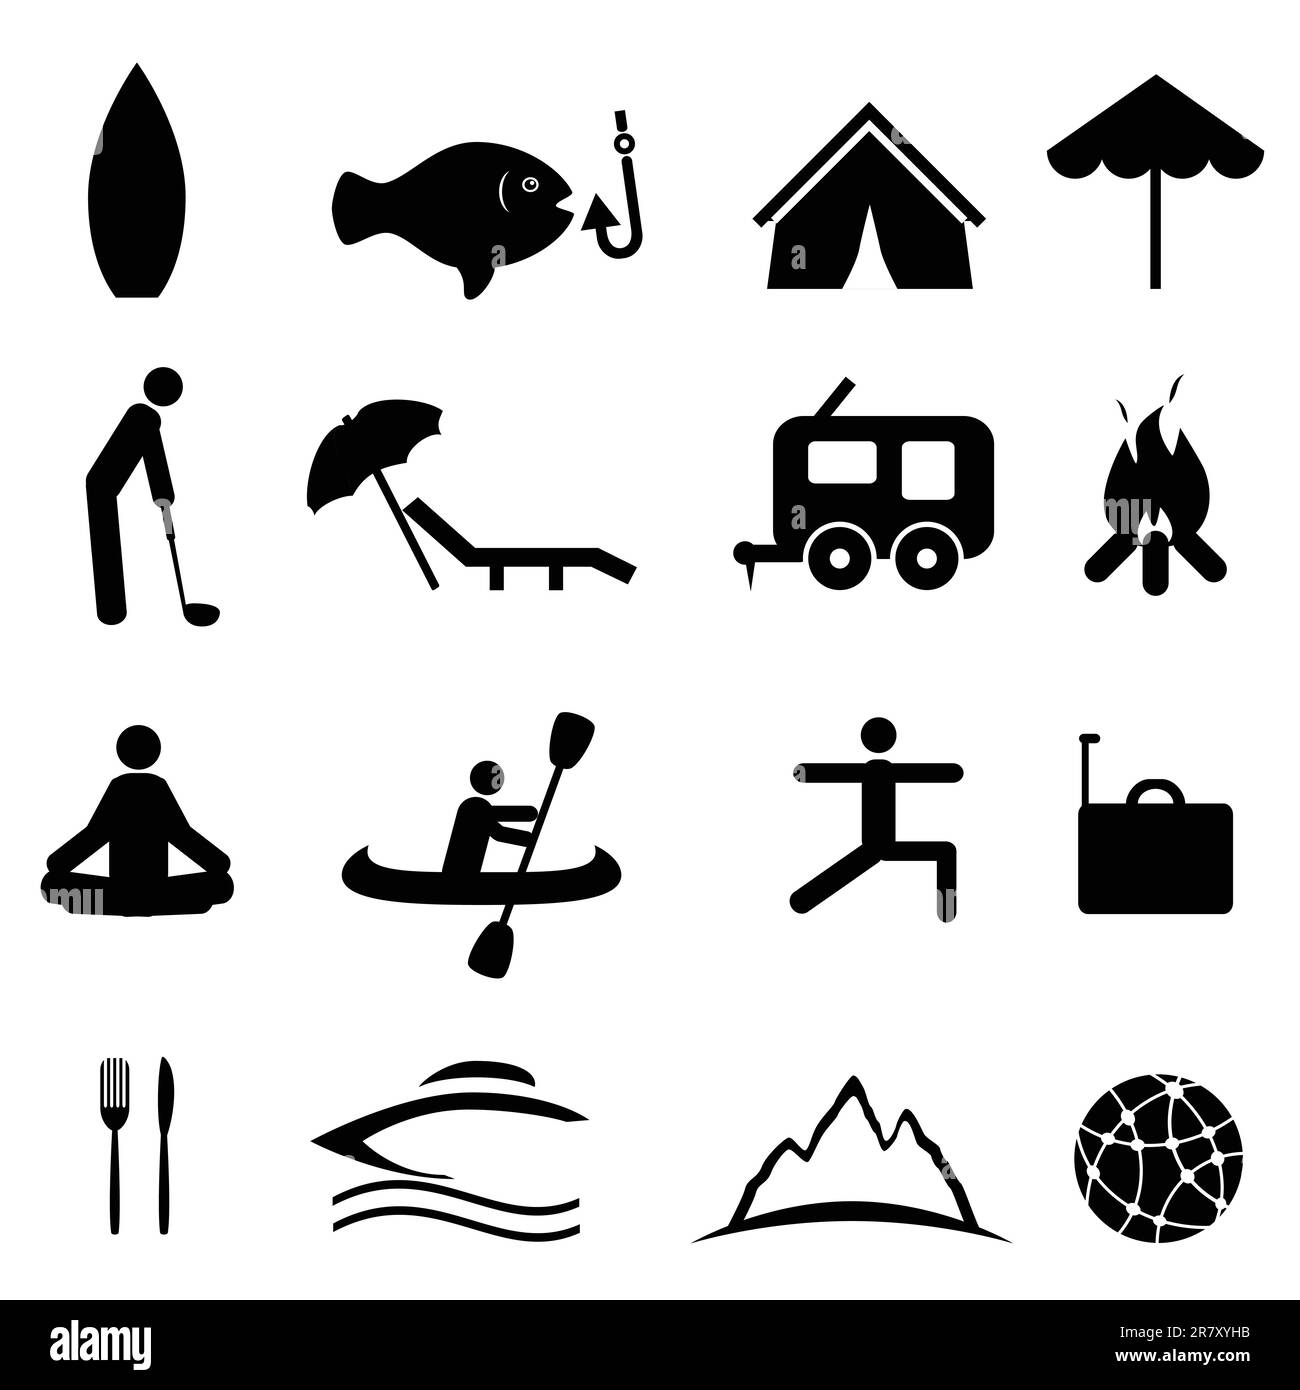 Sports and recreation icon set Stock Vector